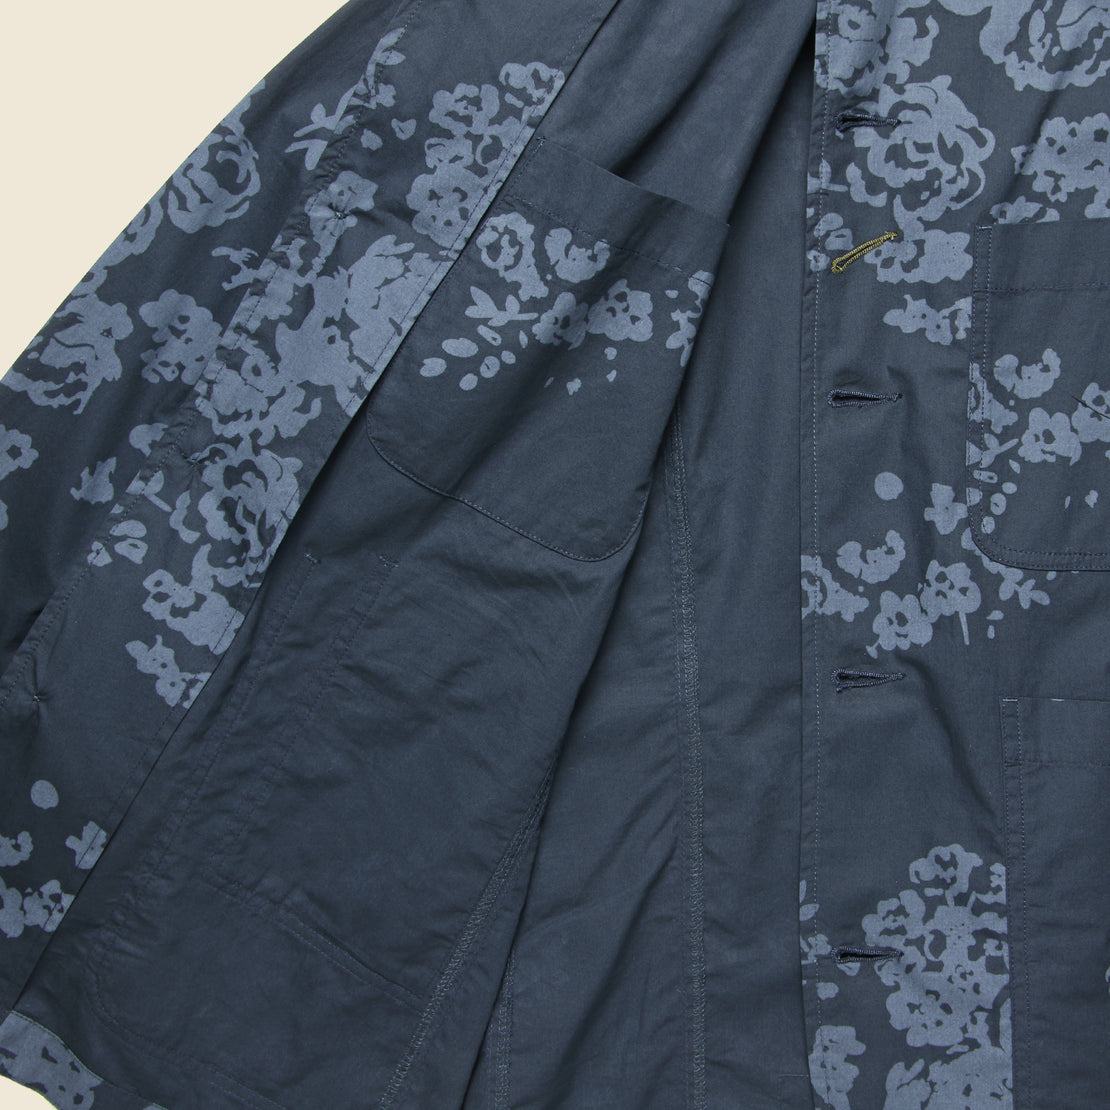 Bakers Jacket - Navy Flower Print Poplin - Universal Works - STAG Provisions - Outerwear - Shirt Jacket